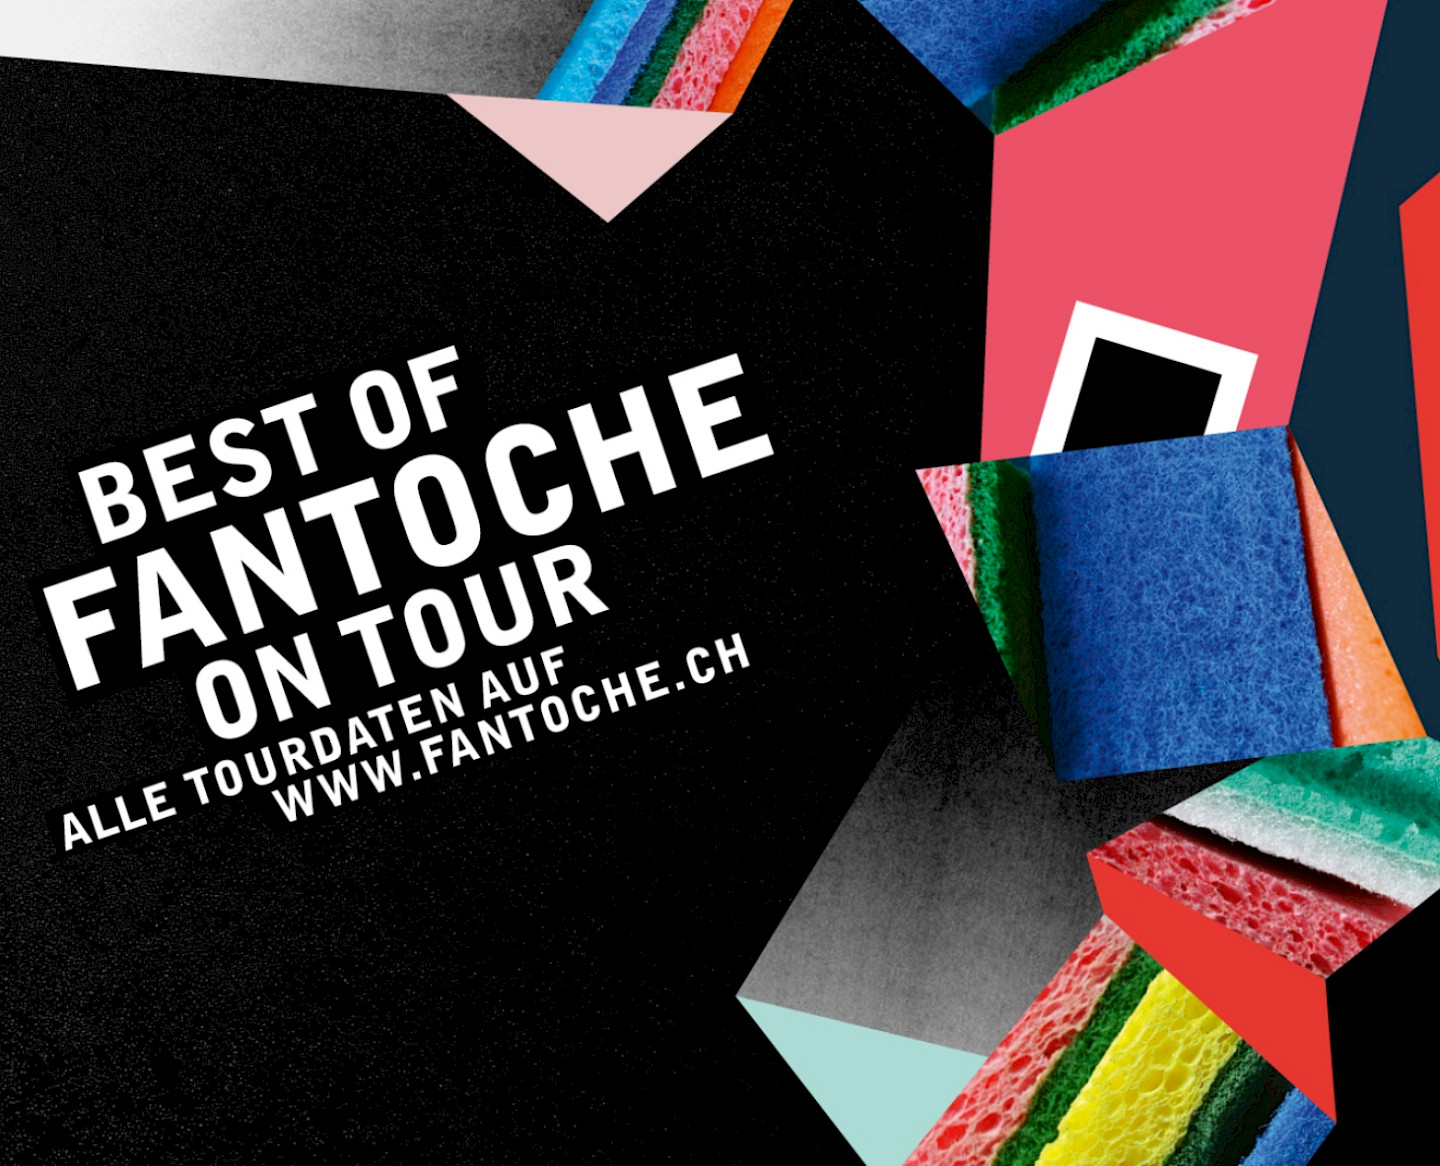 Best of Fantoche on Tour